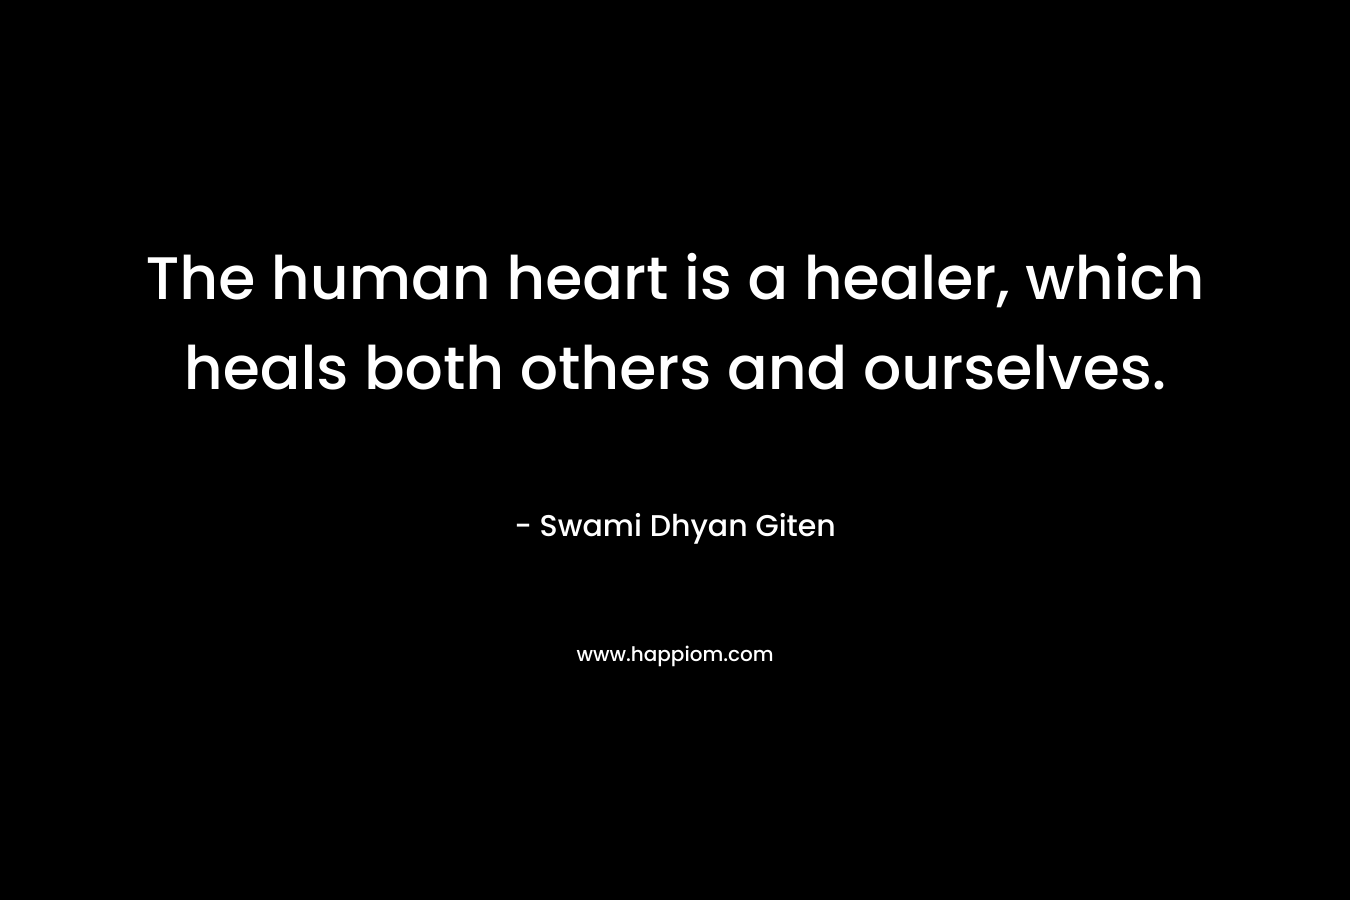 The human heart is a healer, which heals both others and ourselves.